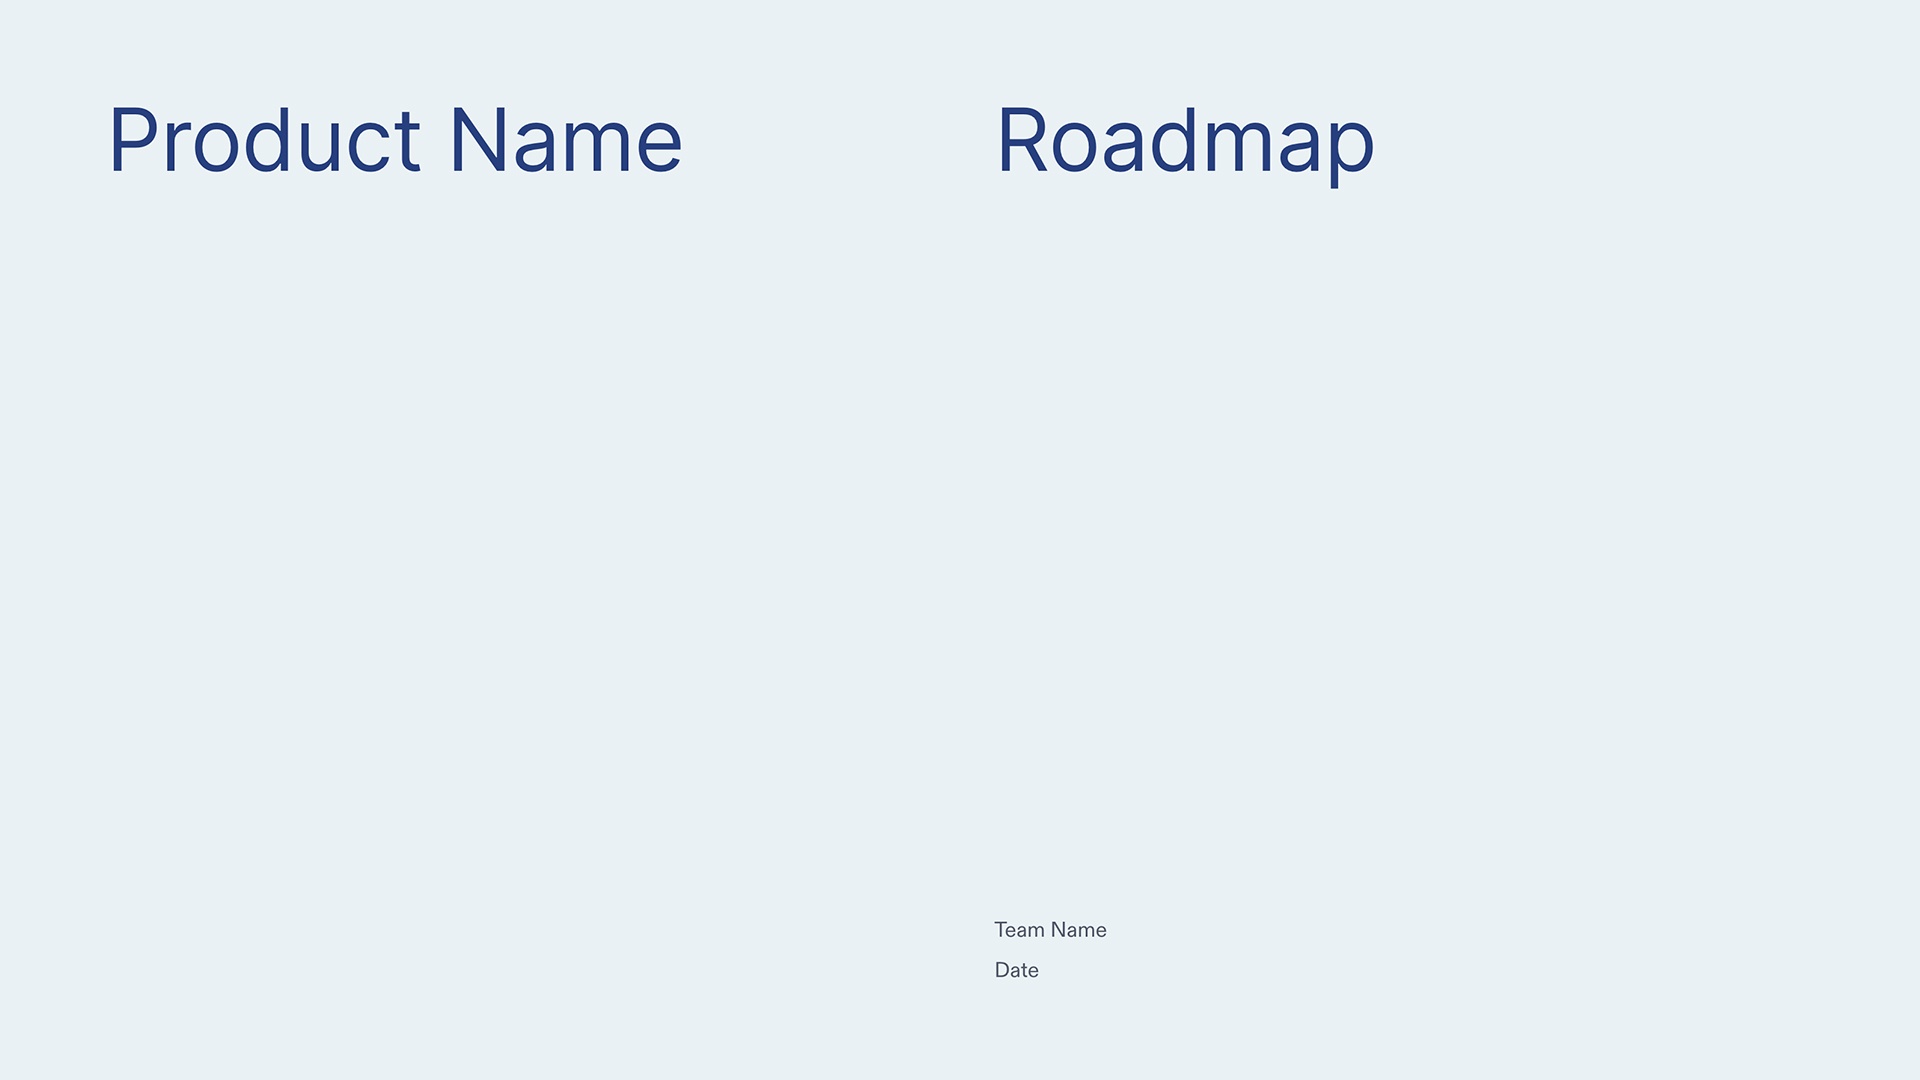 Product Roadmap - Overview